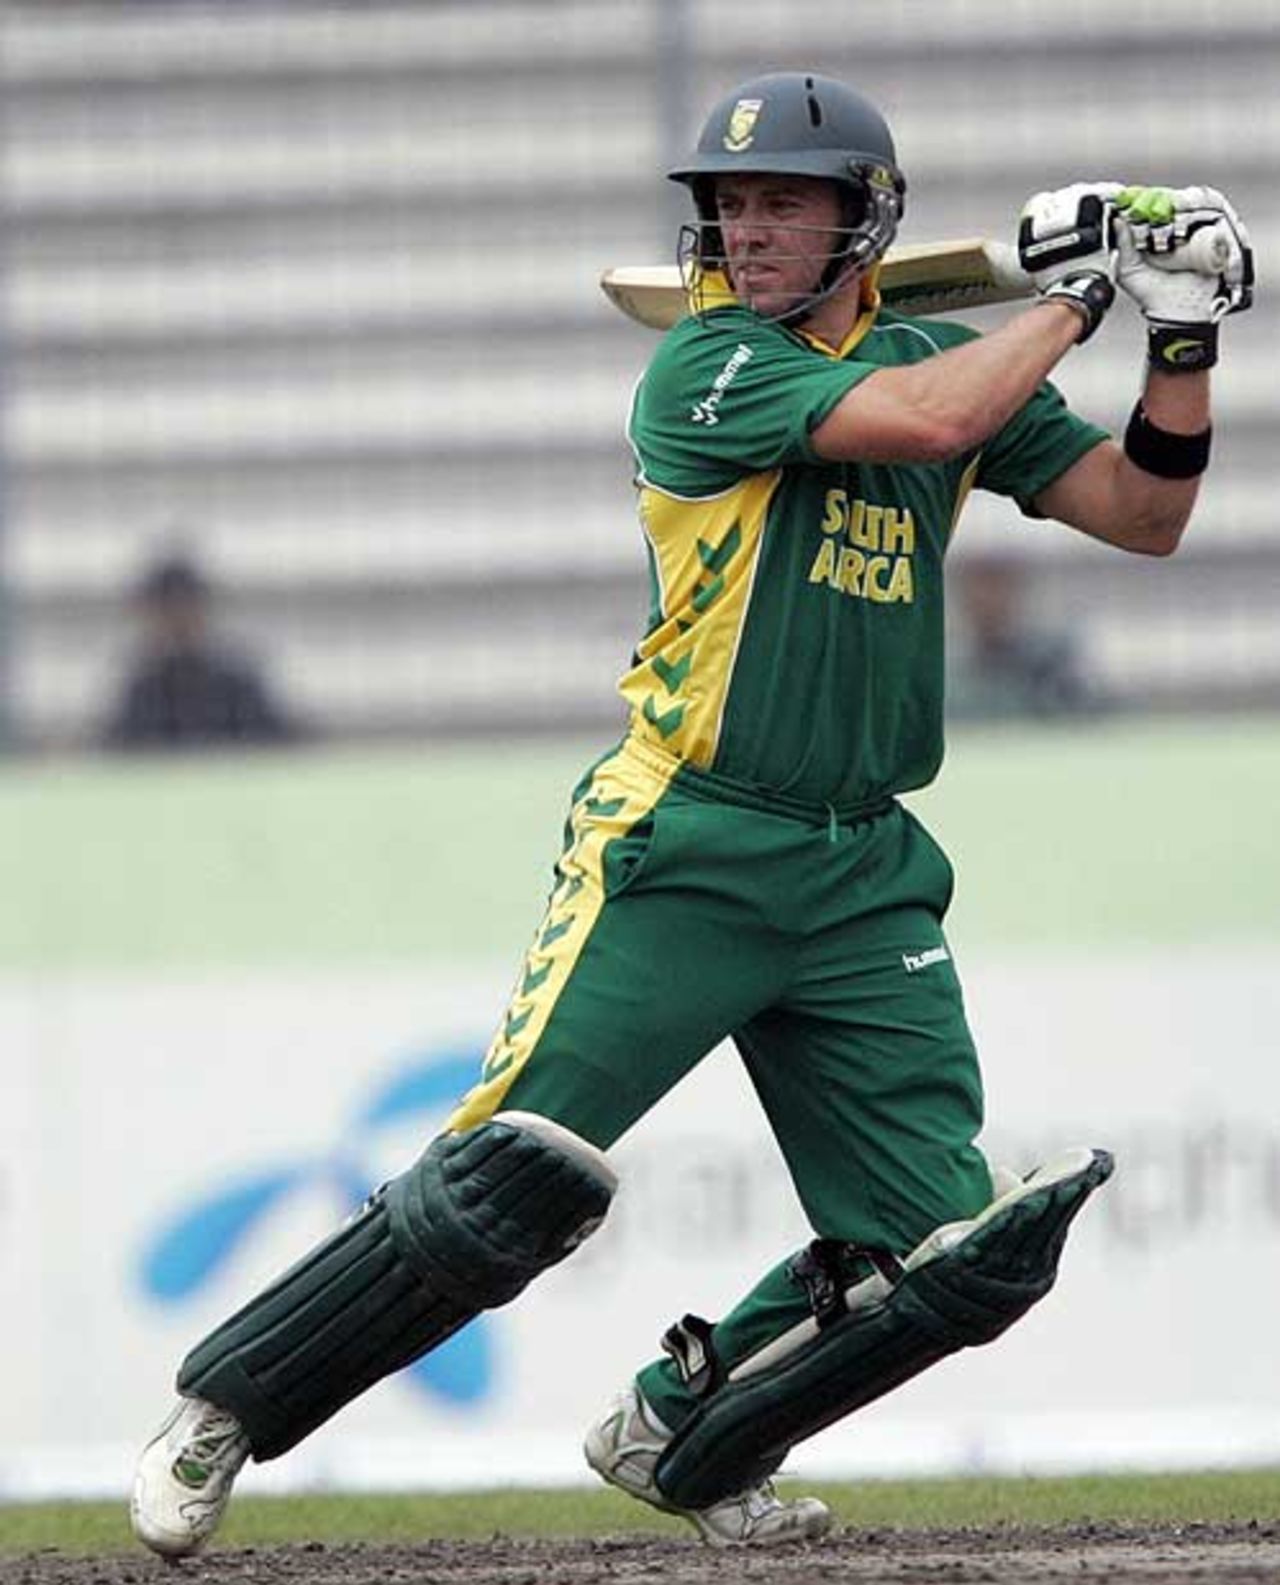 AB de Villiers spanked 40 to take South Africa close, Bangladesh v South Africa, 3rd ODI, Mirpur, March 14, 2008 
